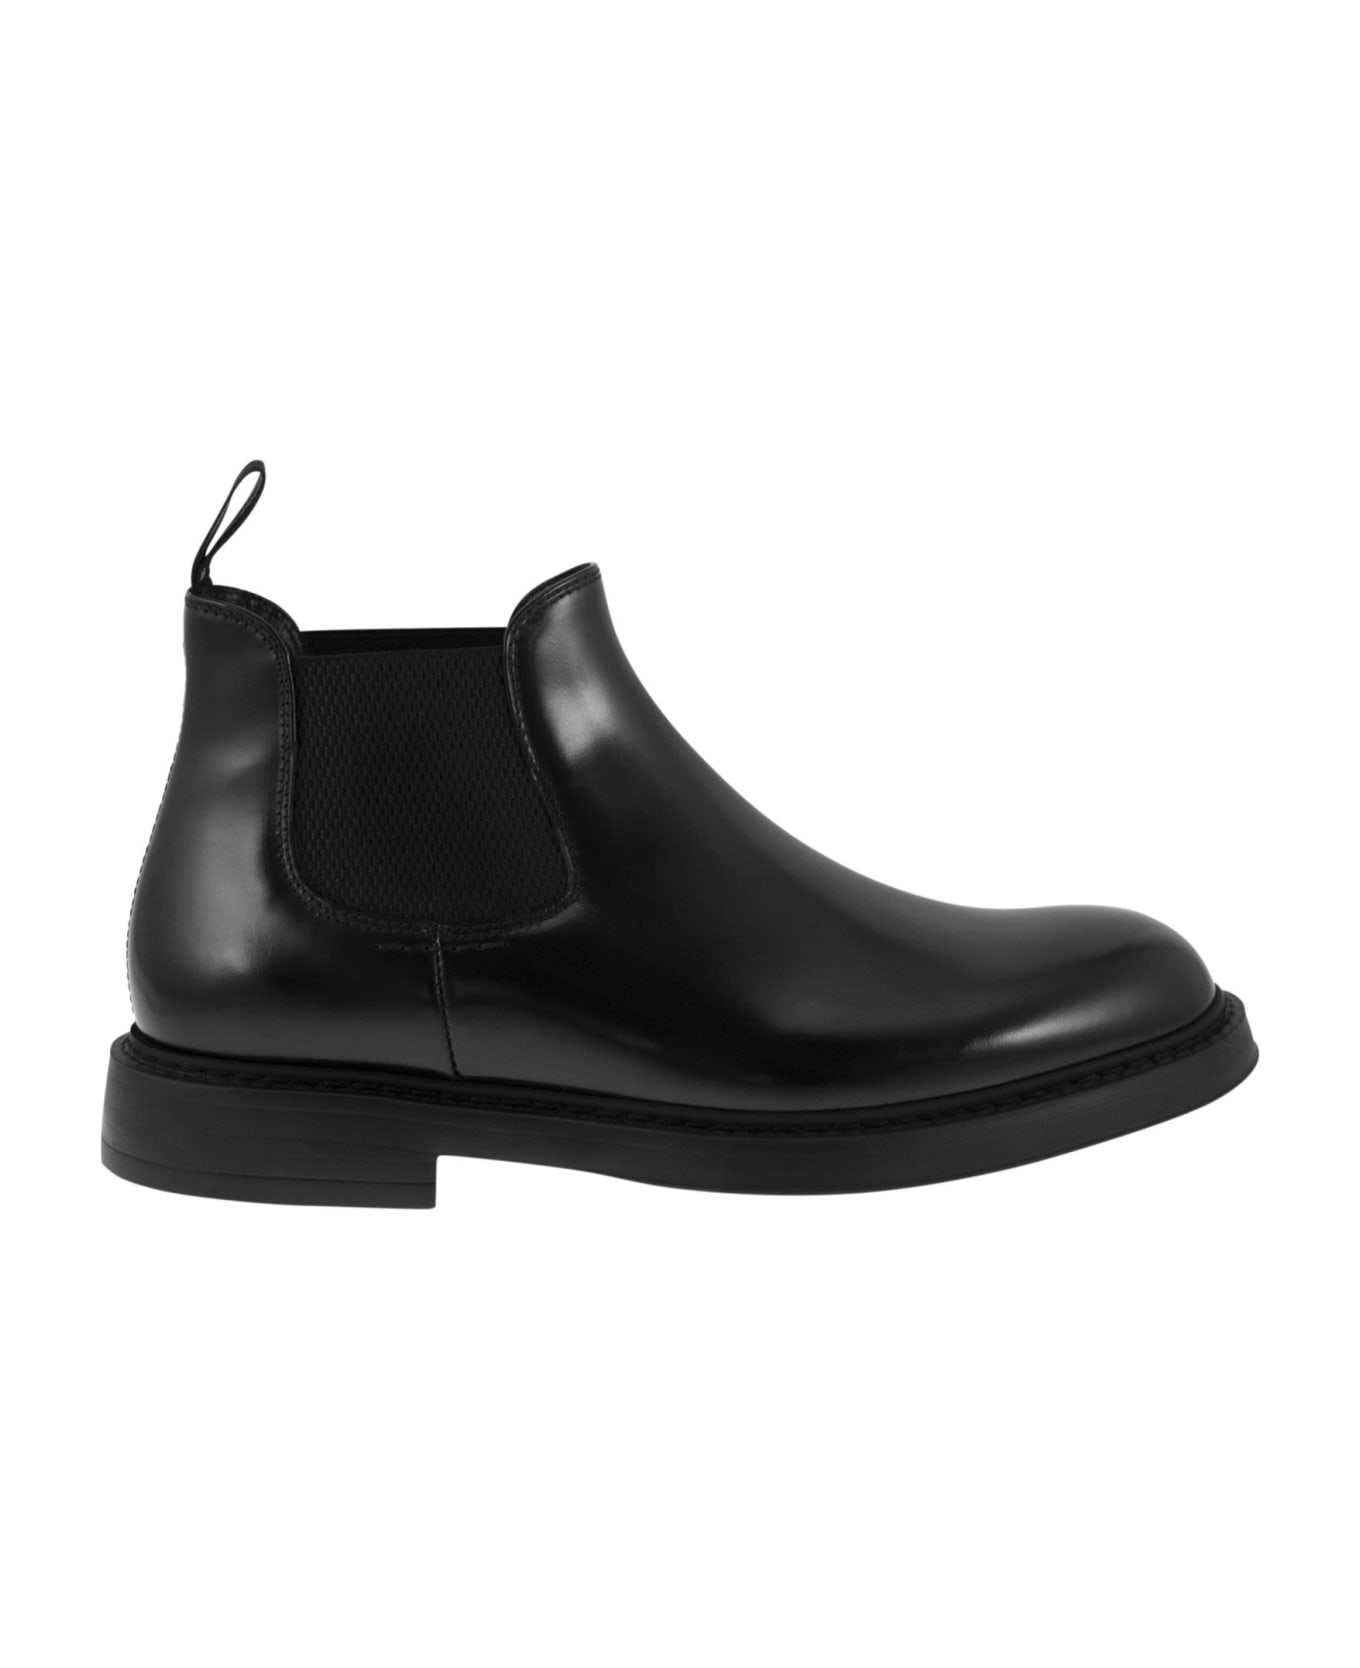 Doucal's Chelsea Leather Ankle Boot - Black ブーツ